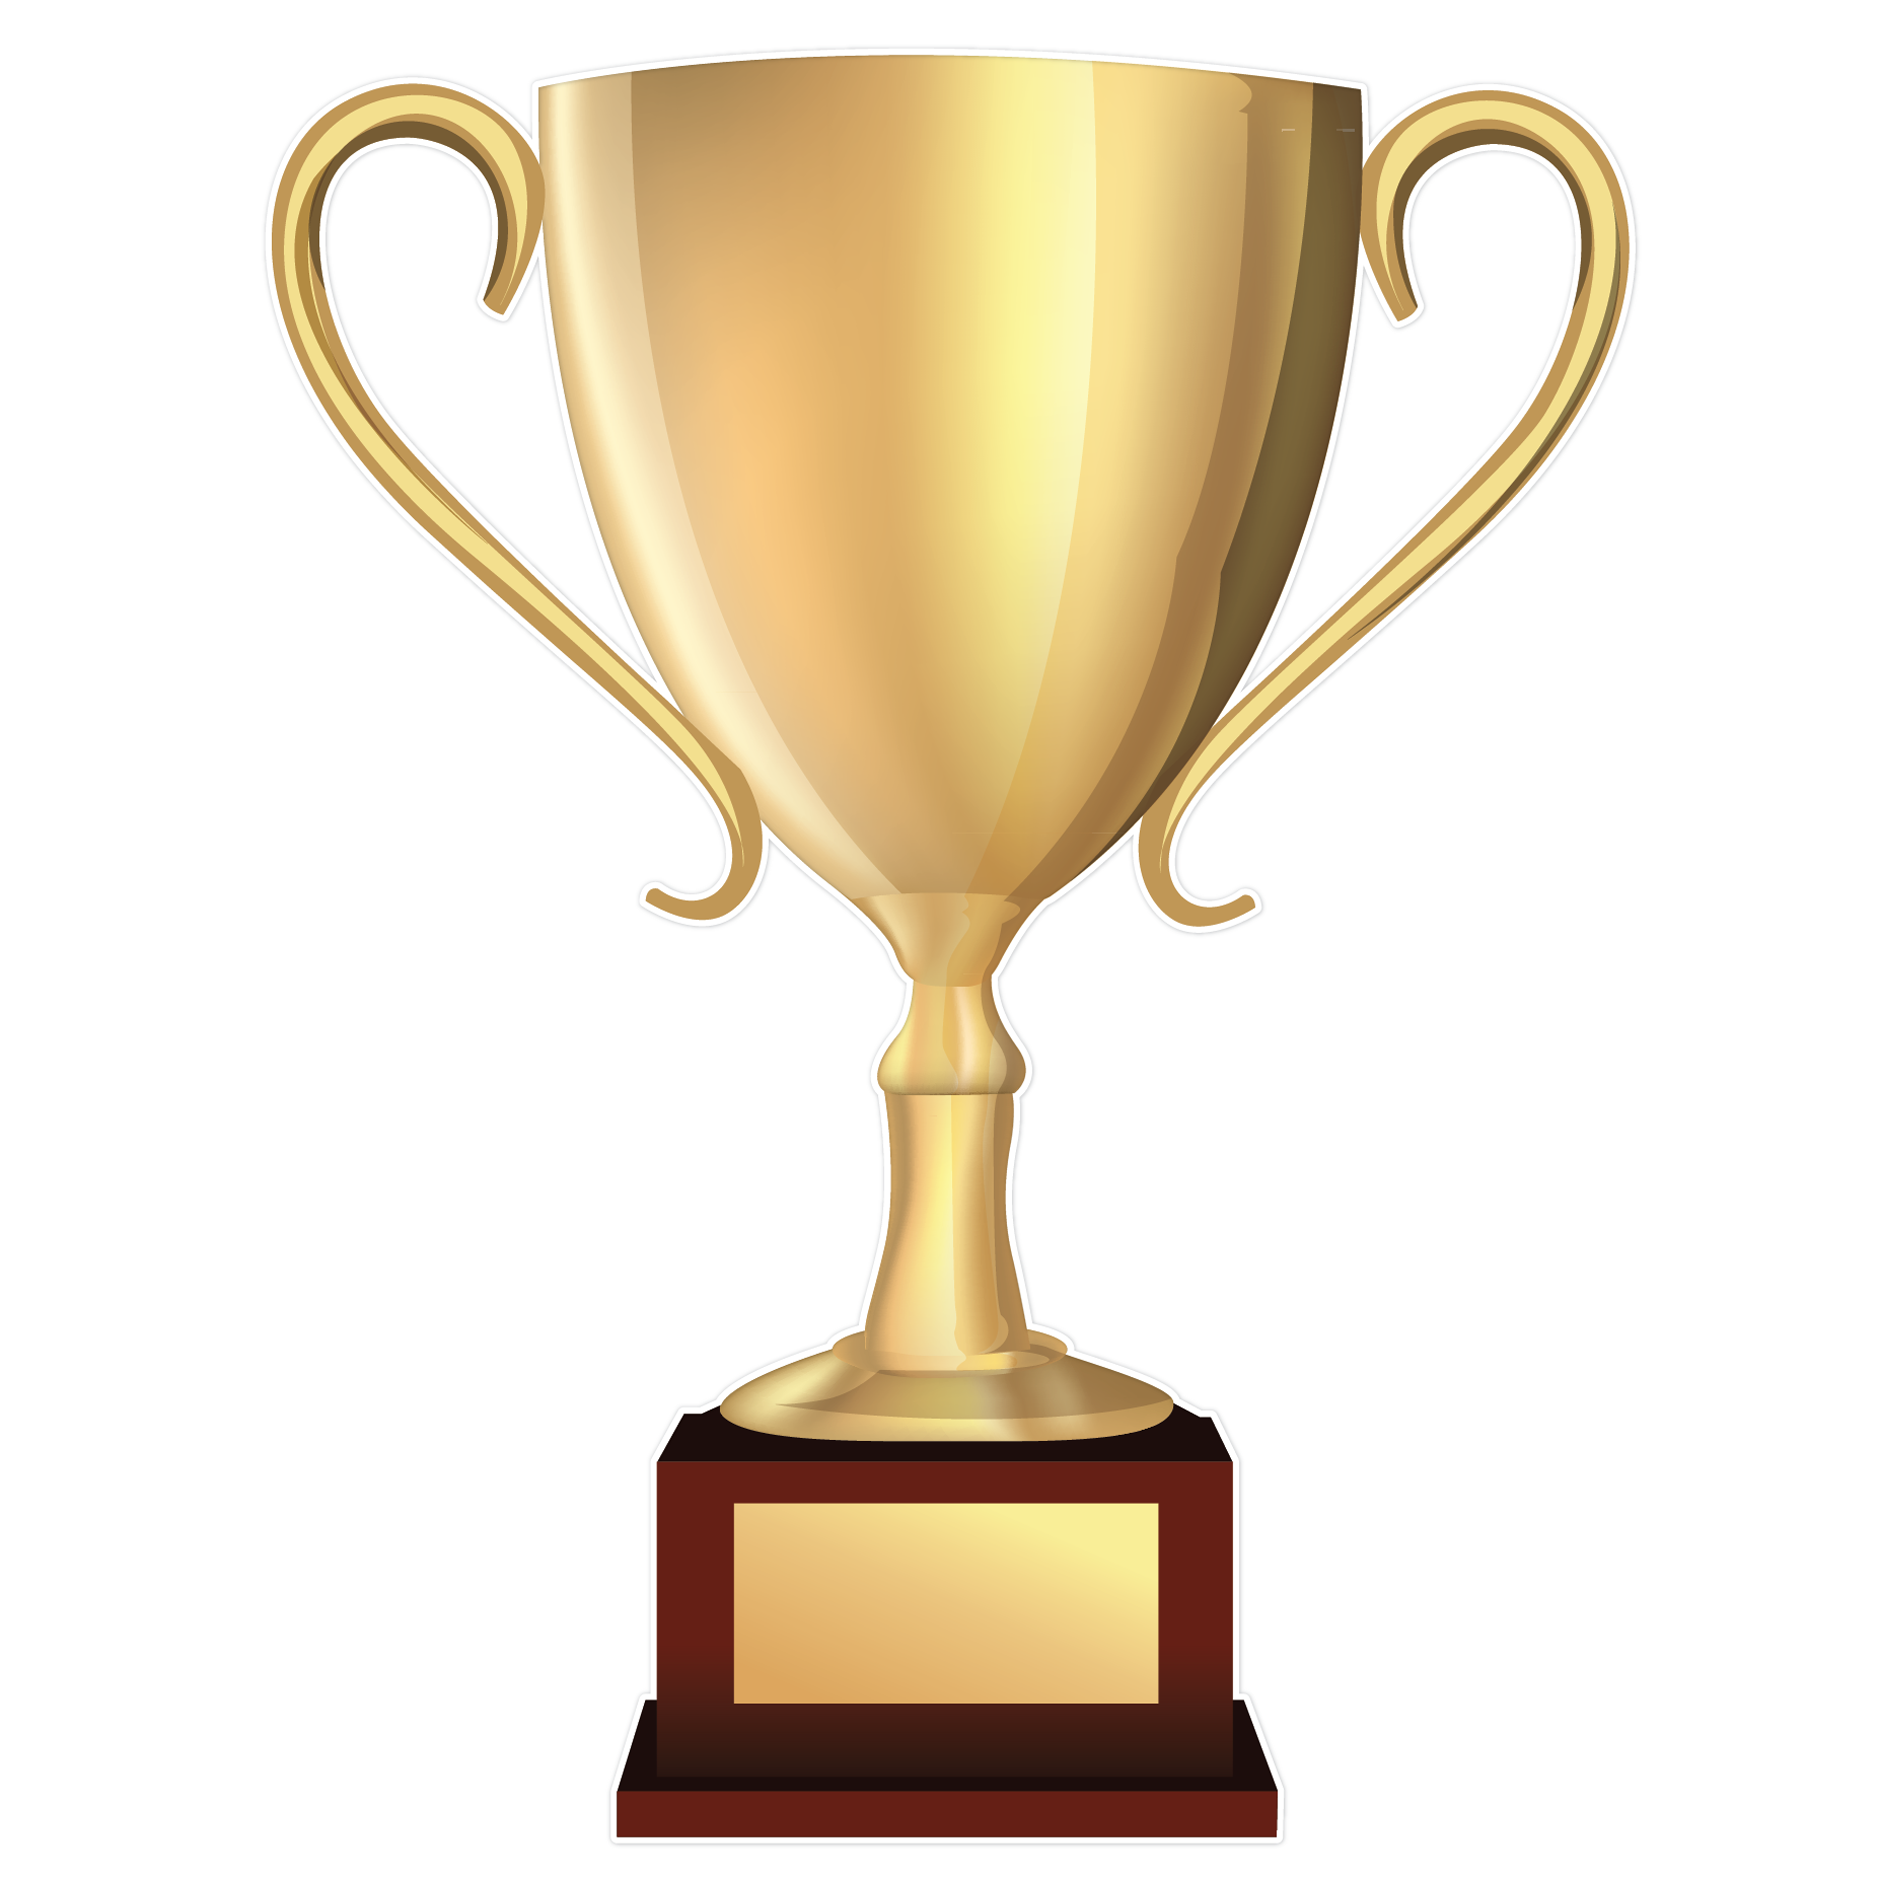 free clipart images trophy - photo #32